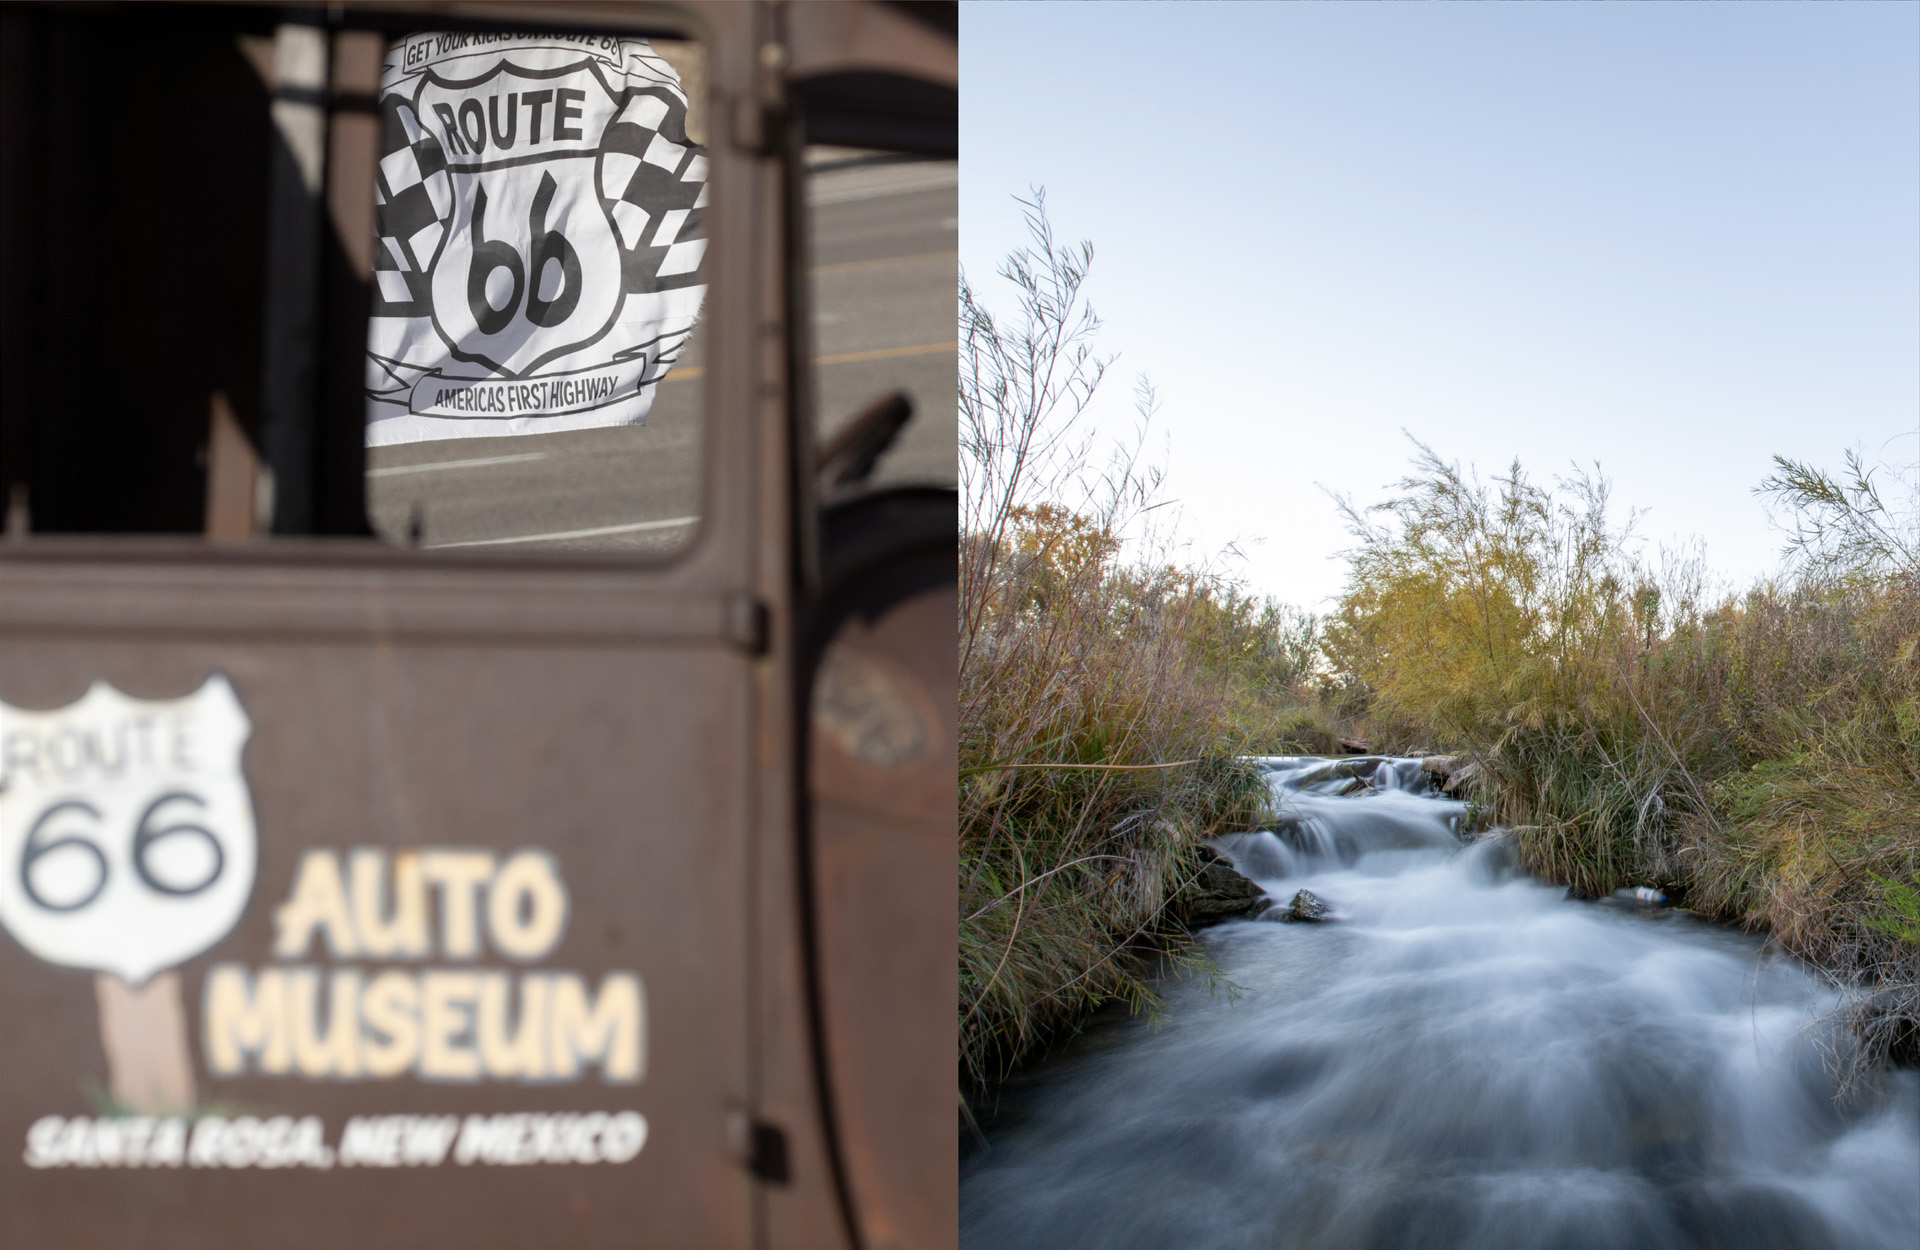 A spring-fed creek at the Blue Hole. Historic Route 66 still fuels nostalgia in Santa Rosa, New Mexico Magazine